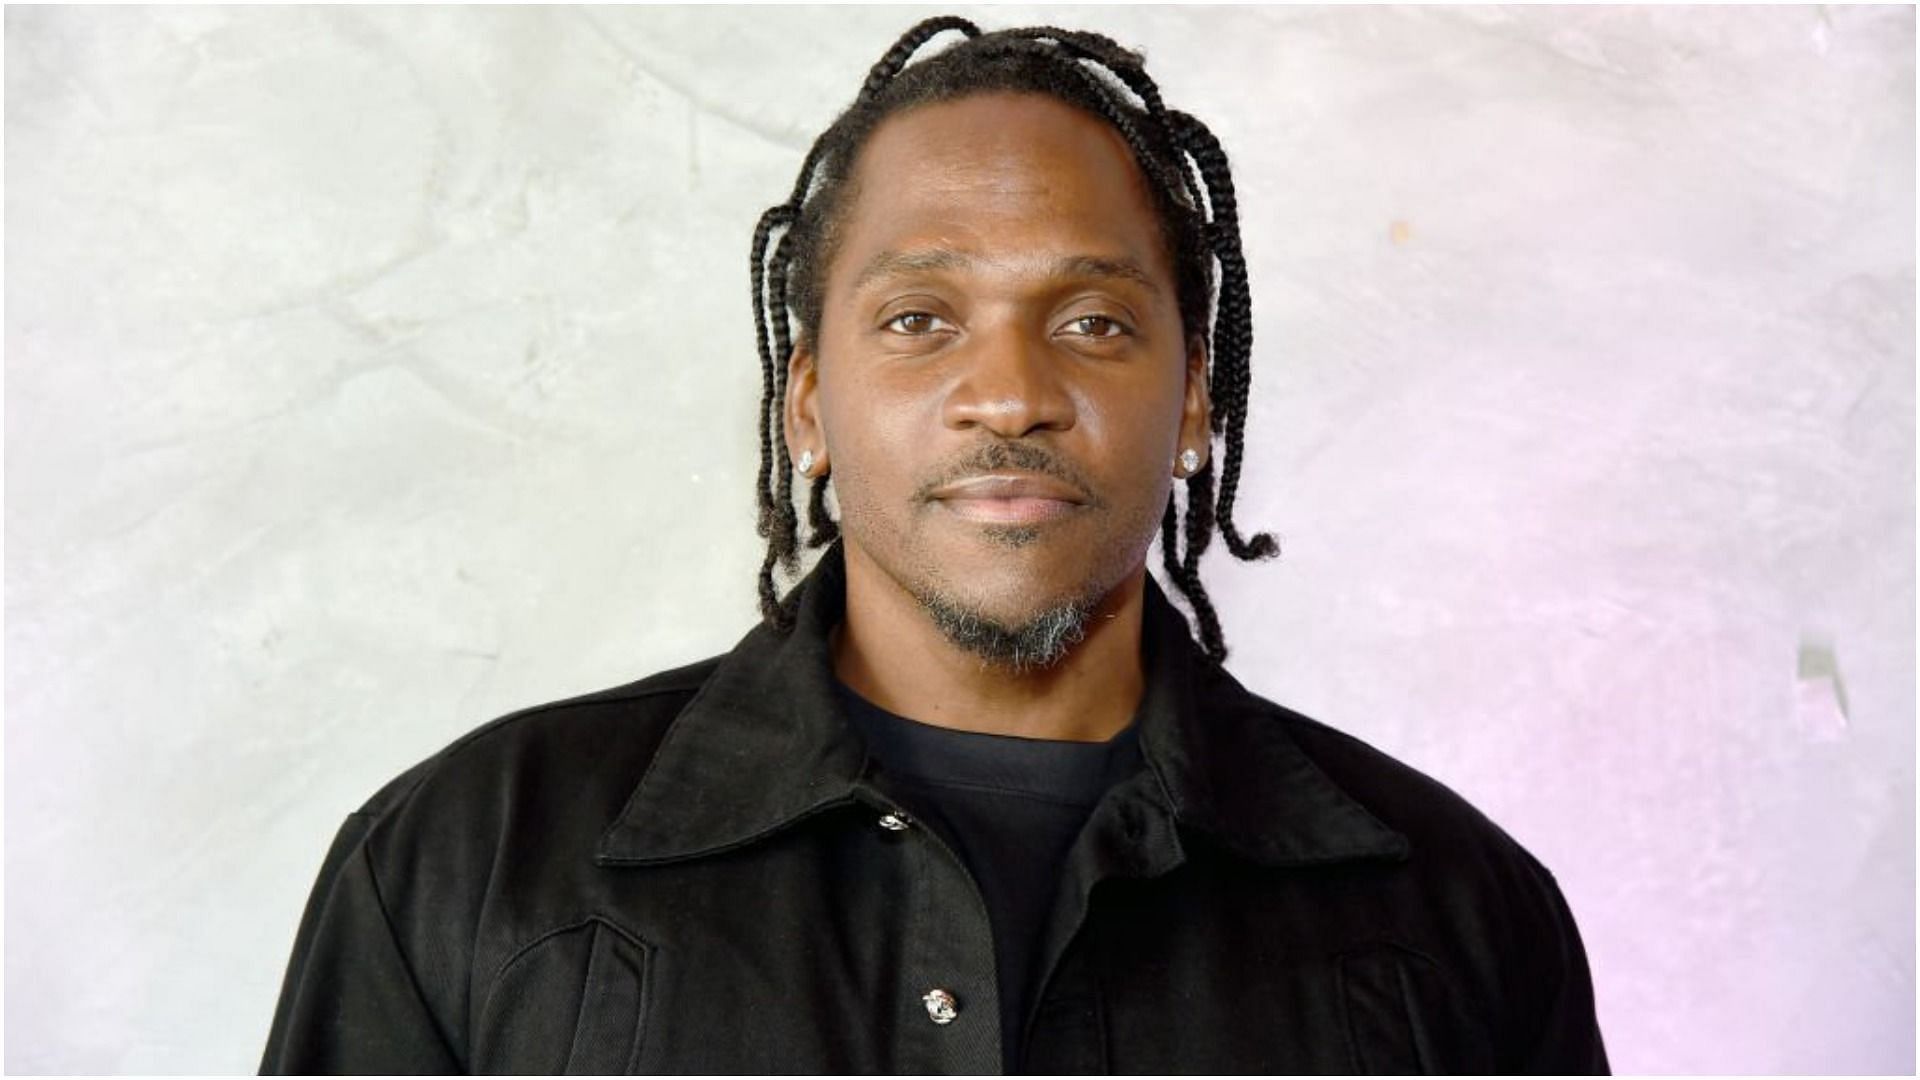 Pusha T has earned a lot of wealth as a rapper and record executive (Image via Michael Kovac/Getty Images)